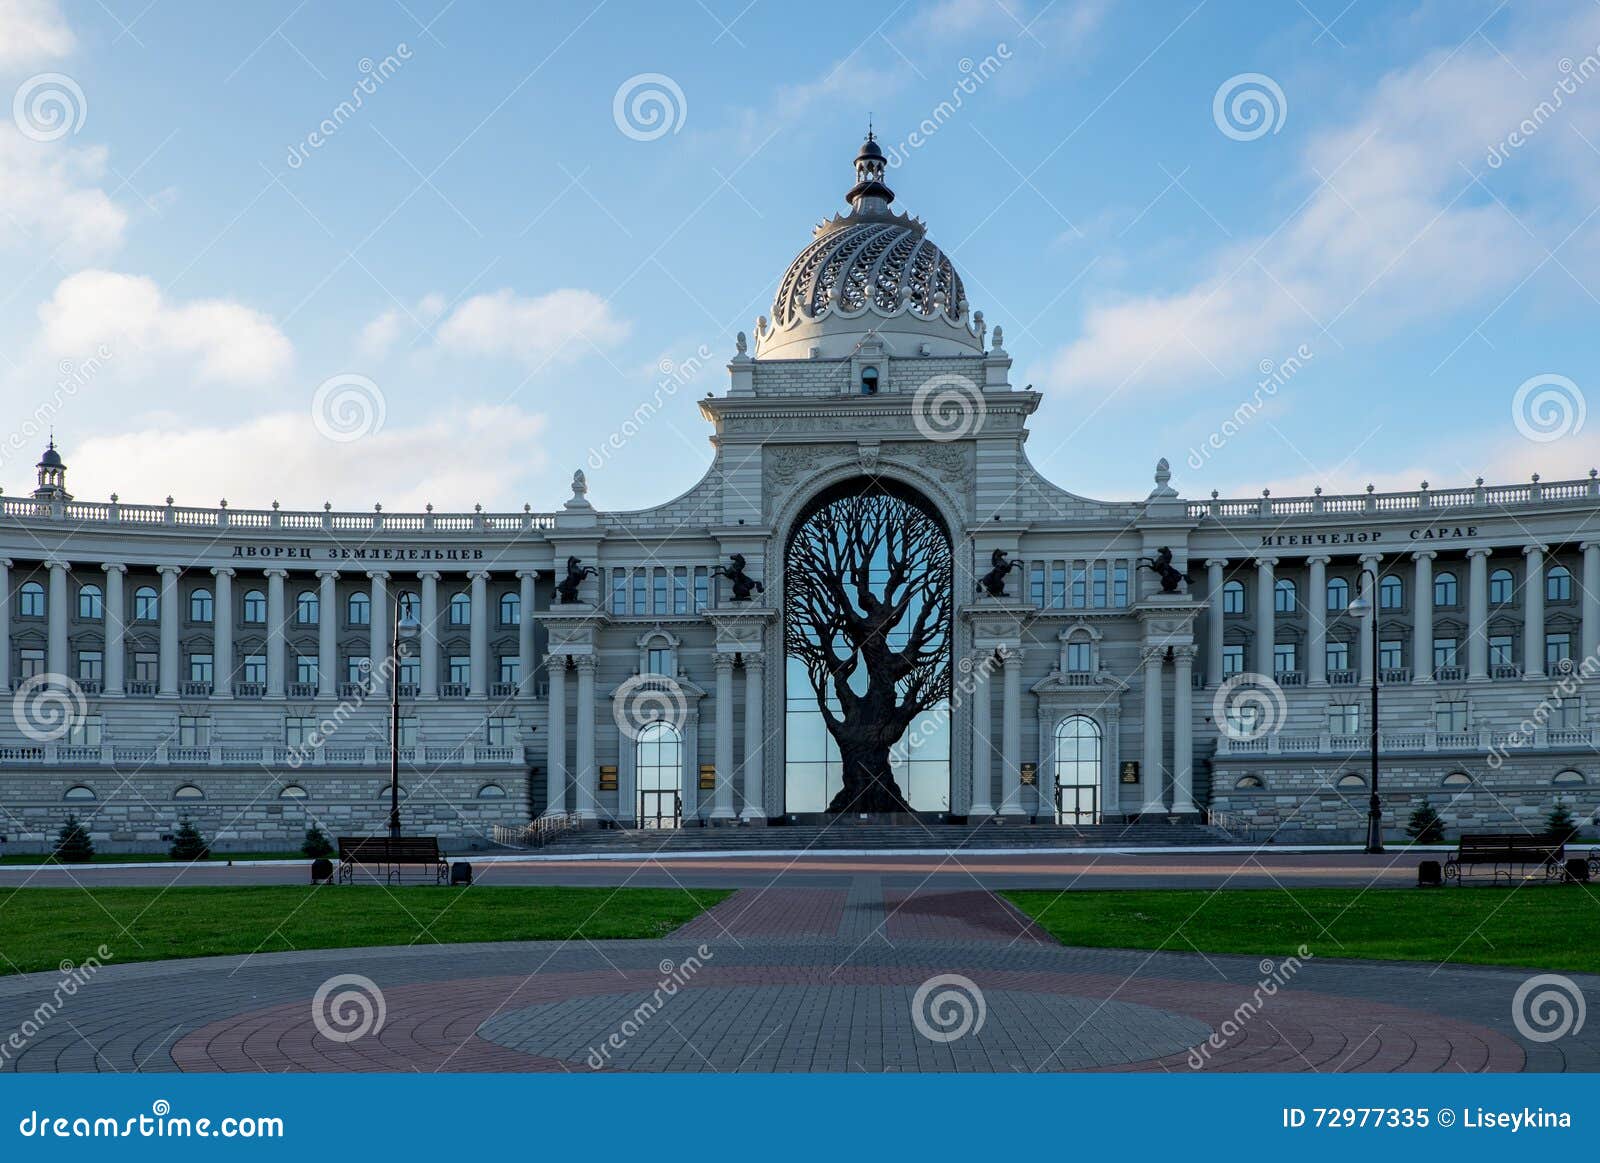 building of the agriculture ministry in kazan. russia